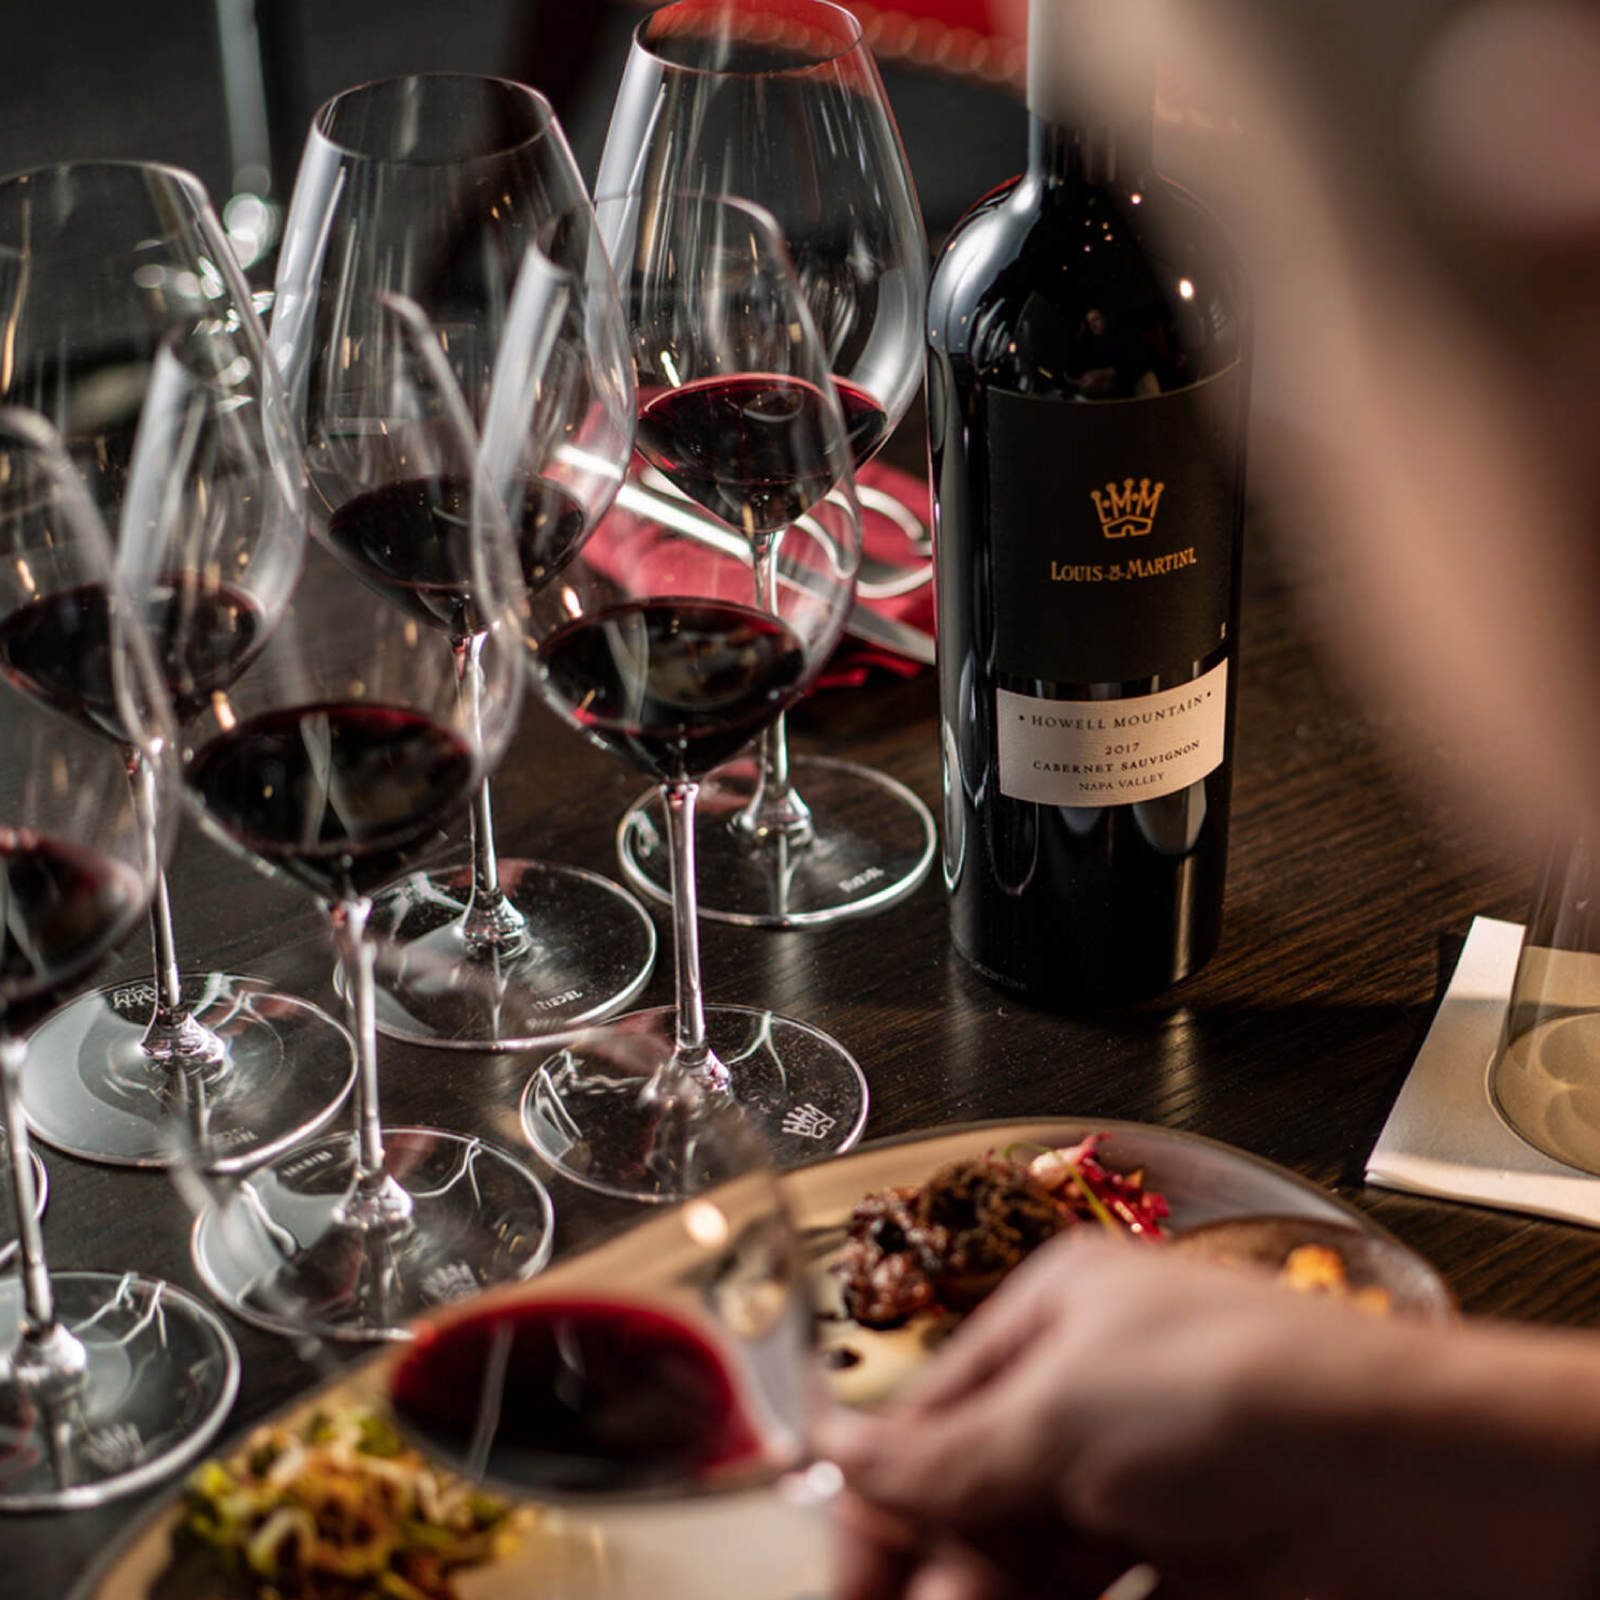 Numerous glasses filled with red wine, alongside food.